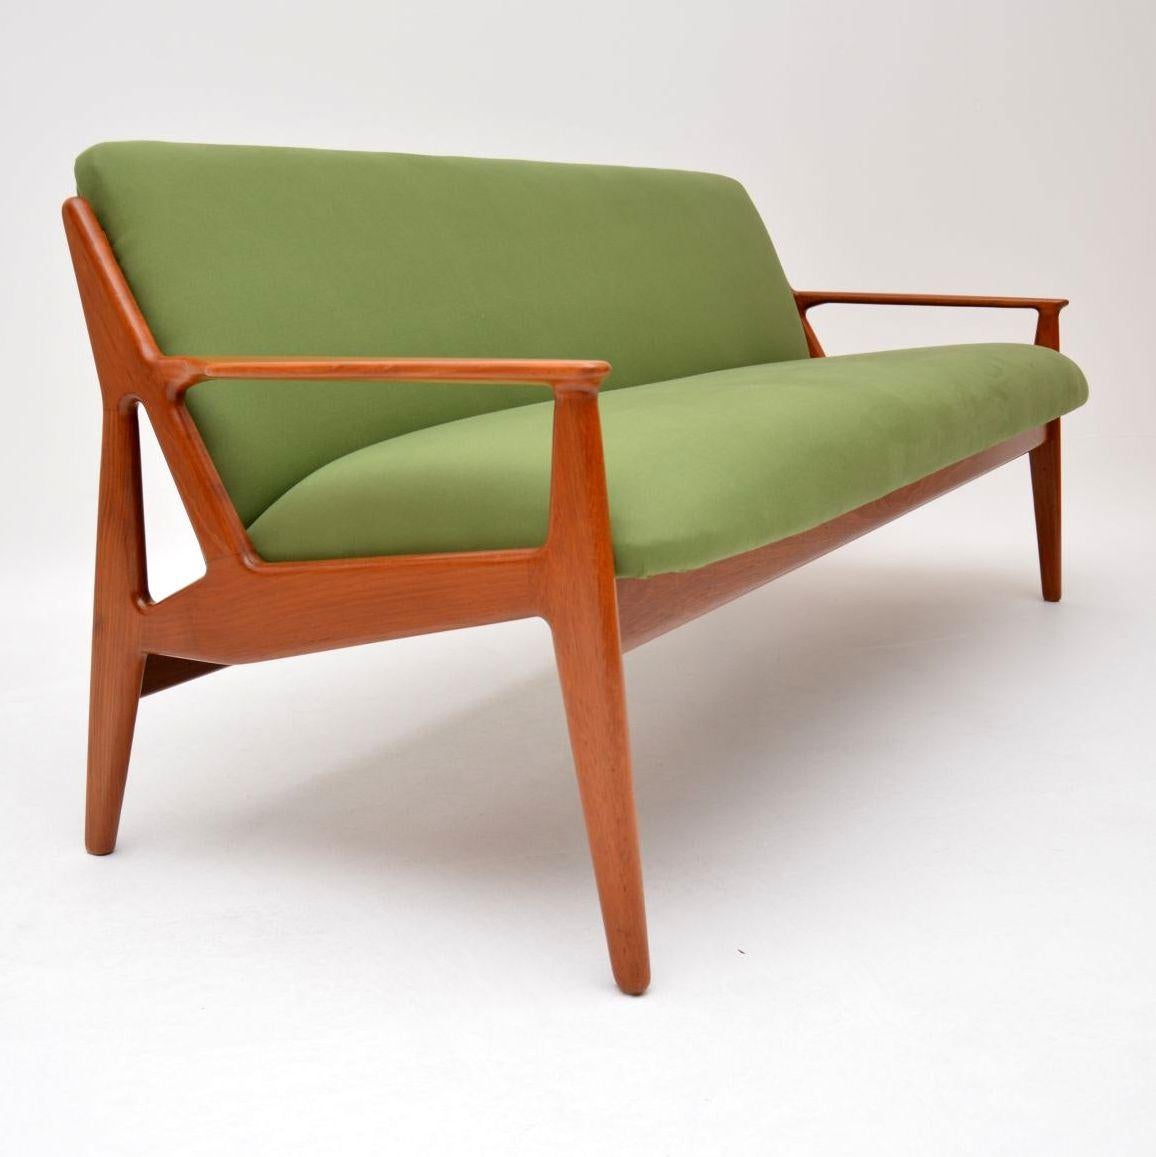 An absolutely stunning and extremely rare vintage Danish sofa in solid teak, this was designed by Arne Vodder and was made by Vamo in the 1950s-1960s. We have had the frame fully stripped and re-polished to a very high standard, we’ve also had this